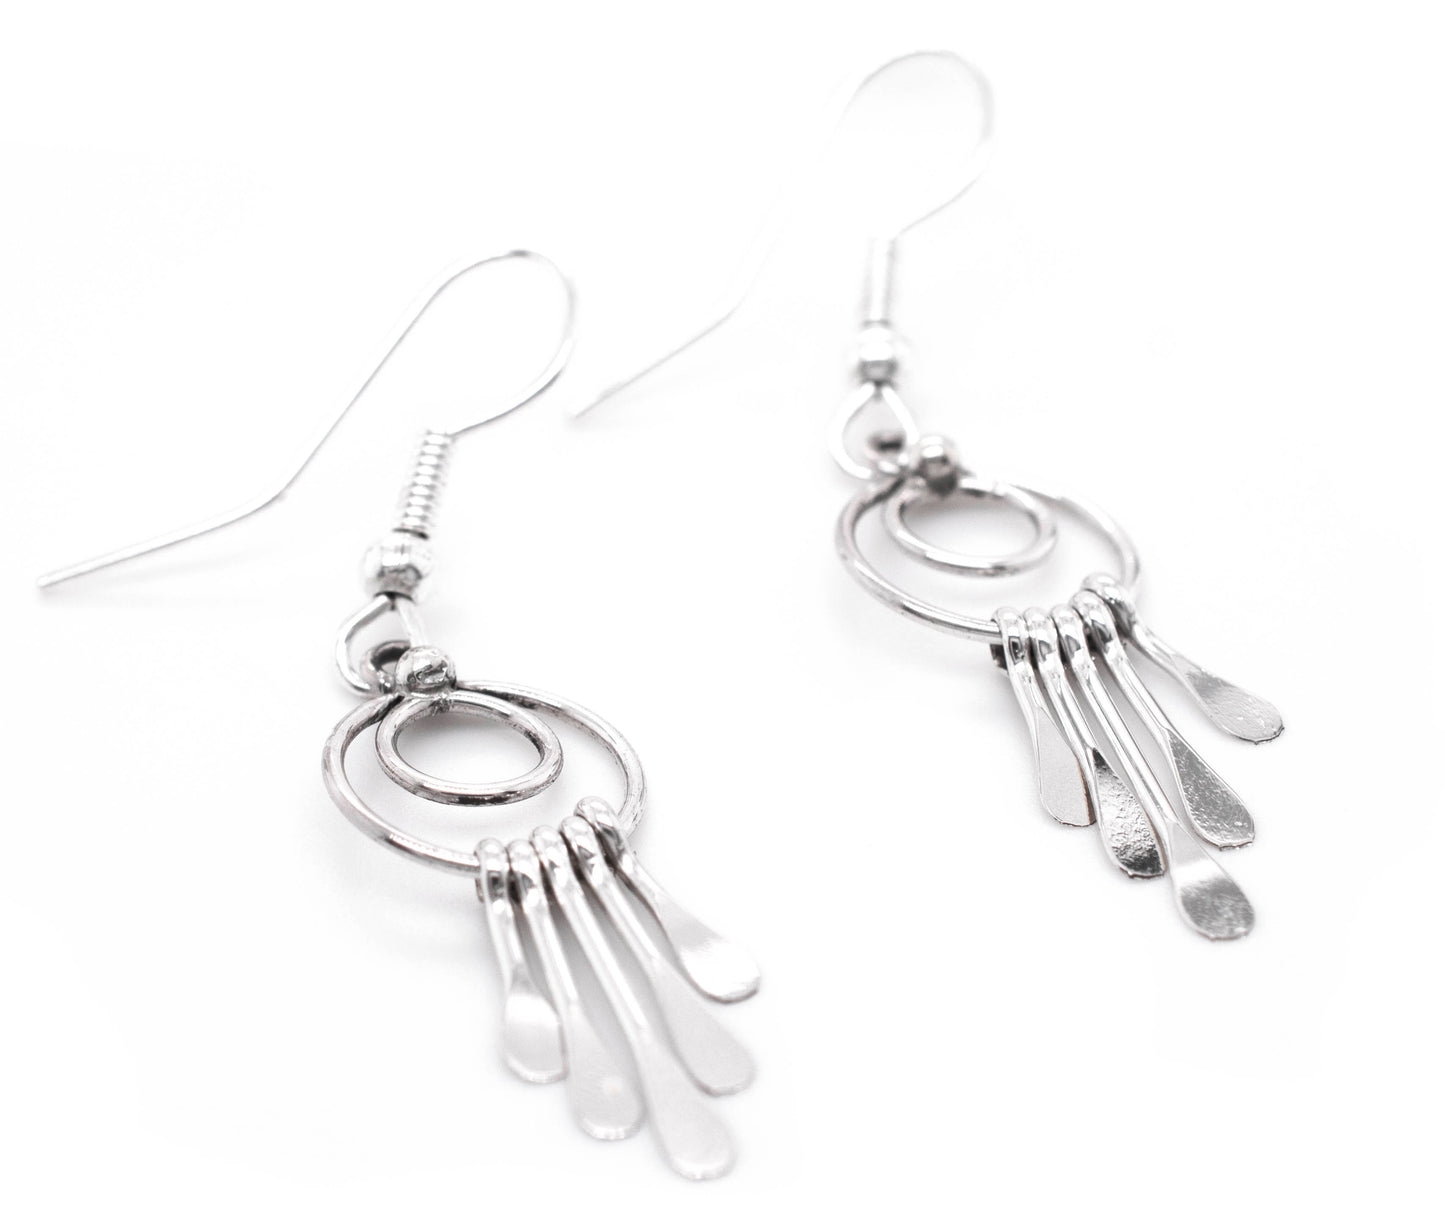 Super Silver's Zuni Silver Waterfall Earrings, handmade Native American earrings with southwest charm, dangling gracefully on a white background.